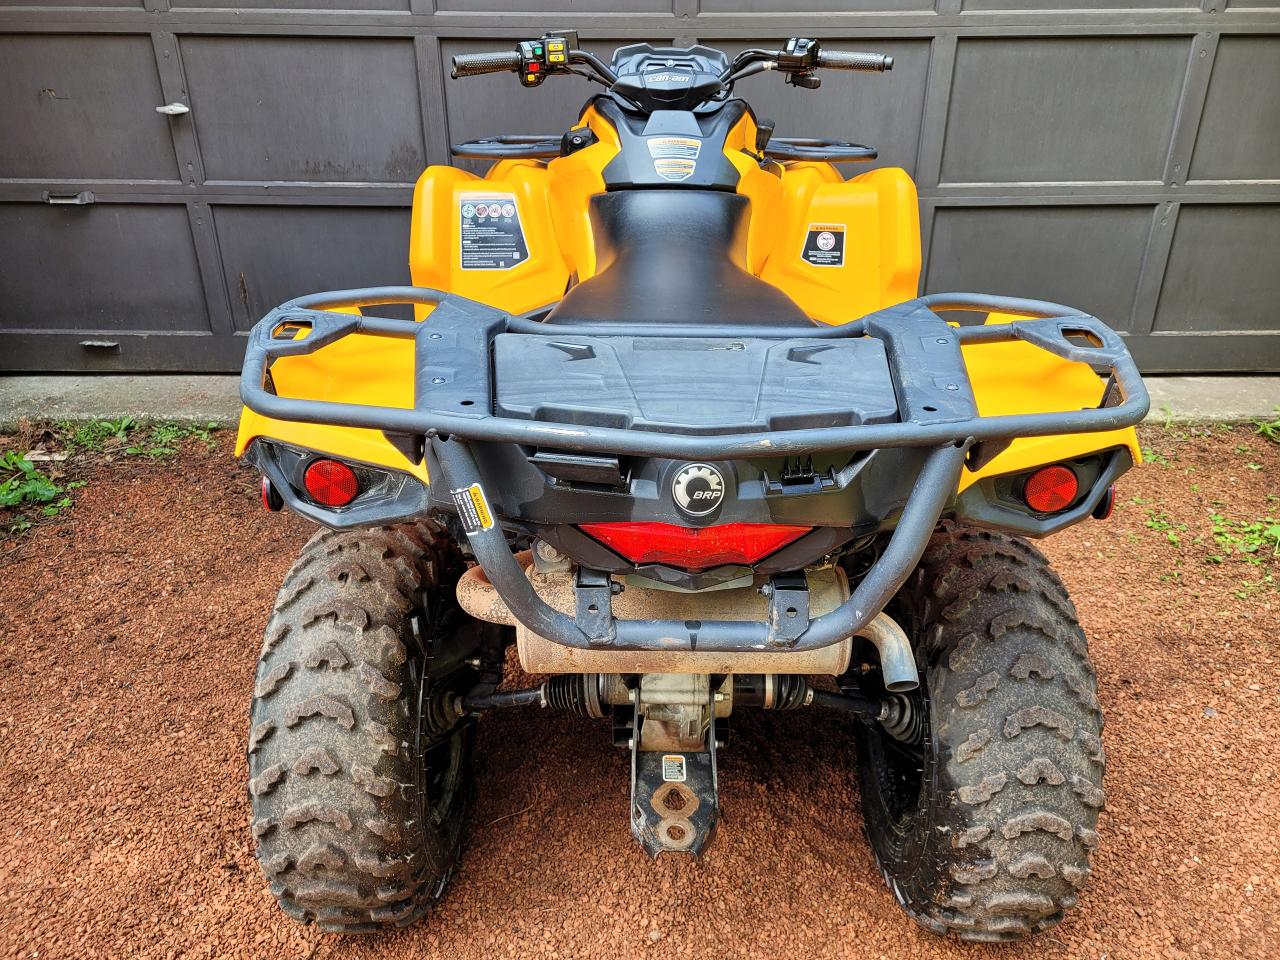 2019 Can-Am Outlander 450 DPS 4x4 1-Owner Financing Available Trade-ins Welcome! - Photo #4